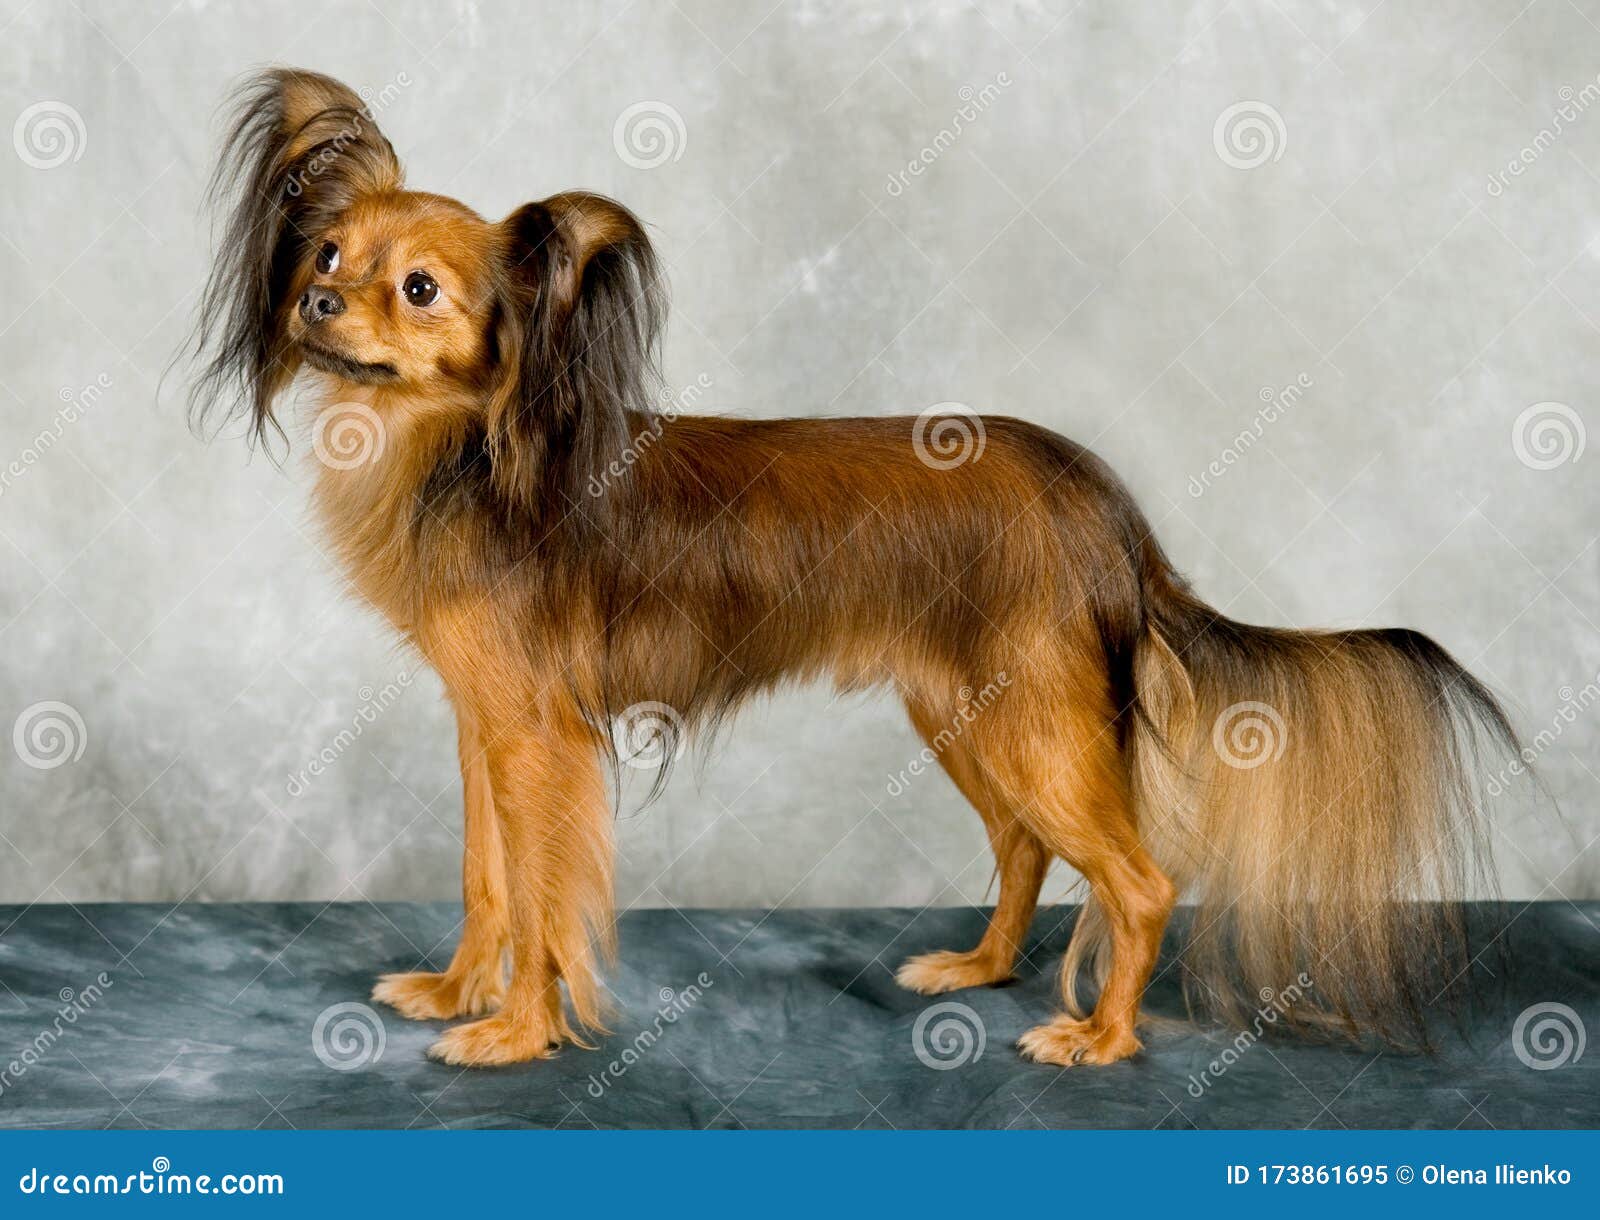 russian toy terrier